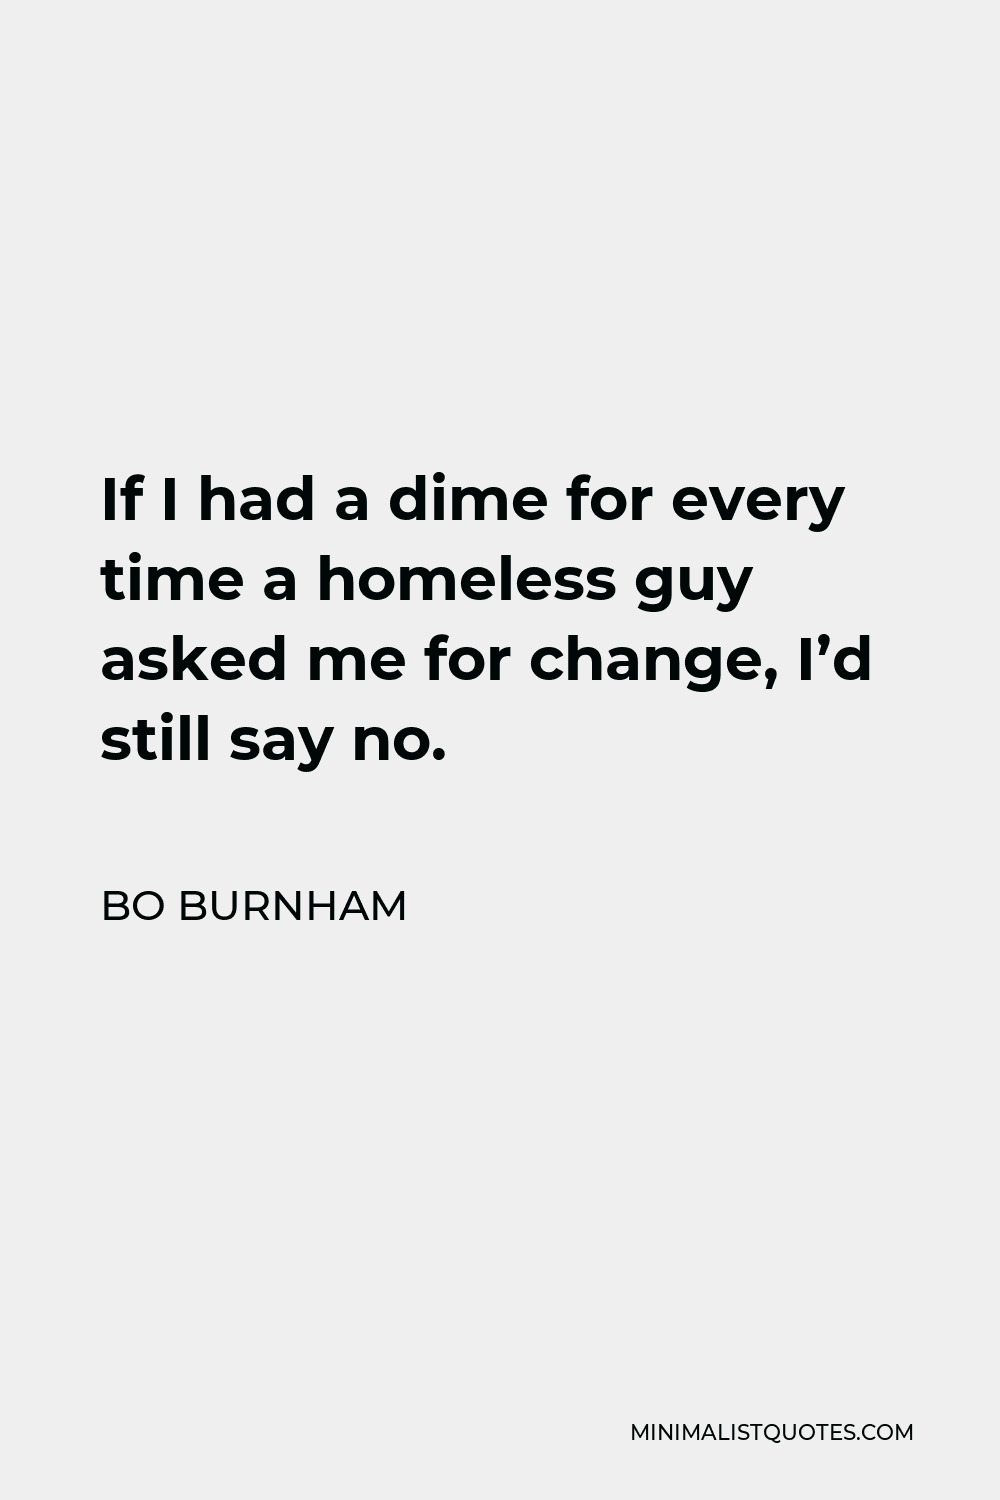 Bo Burnham Quote - If I had a dime for every time a homeless guy asked me for change, I’d still say no.